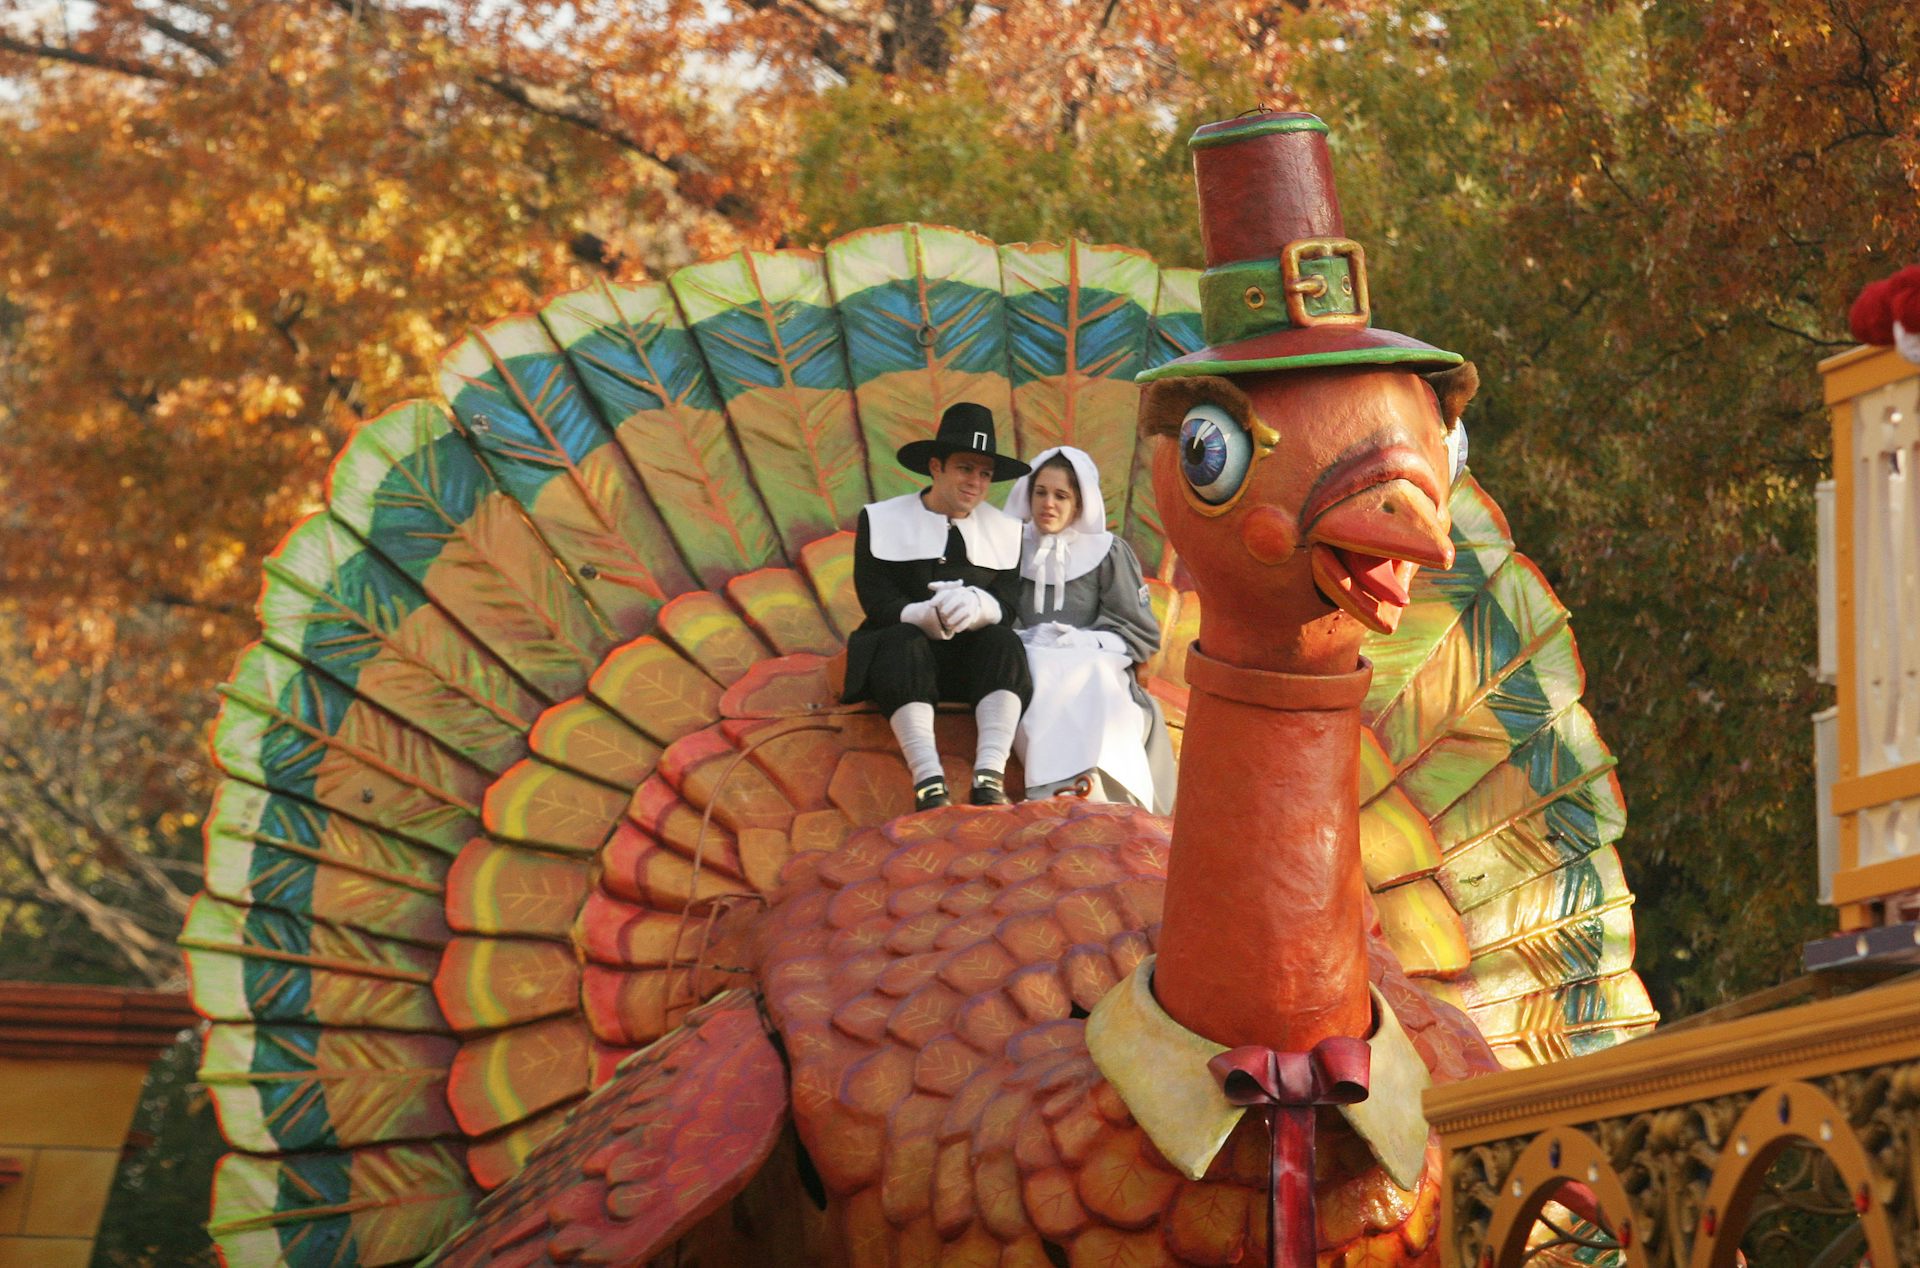 Two people dressed as Pilgrims sit atop a giant turkey float that is wearing a Pilgrim hat.